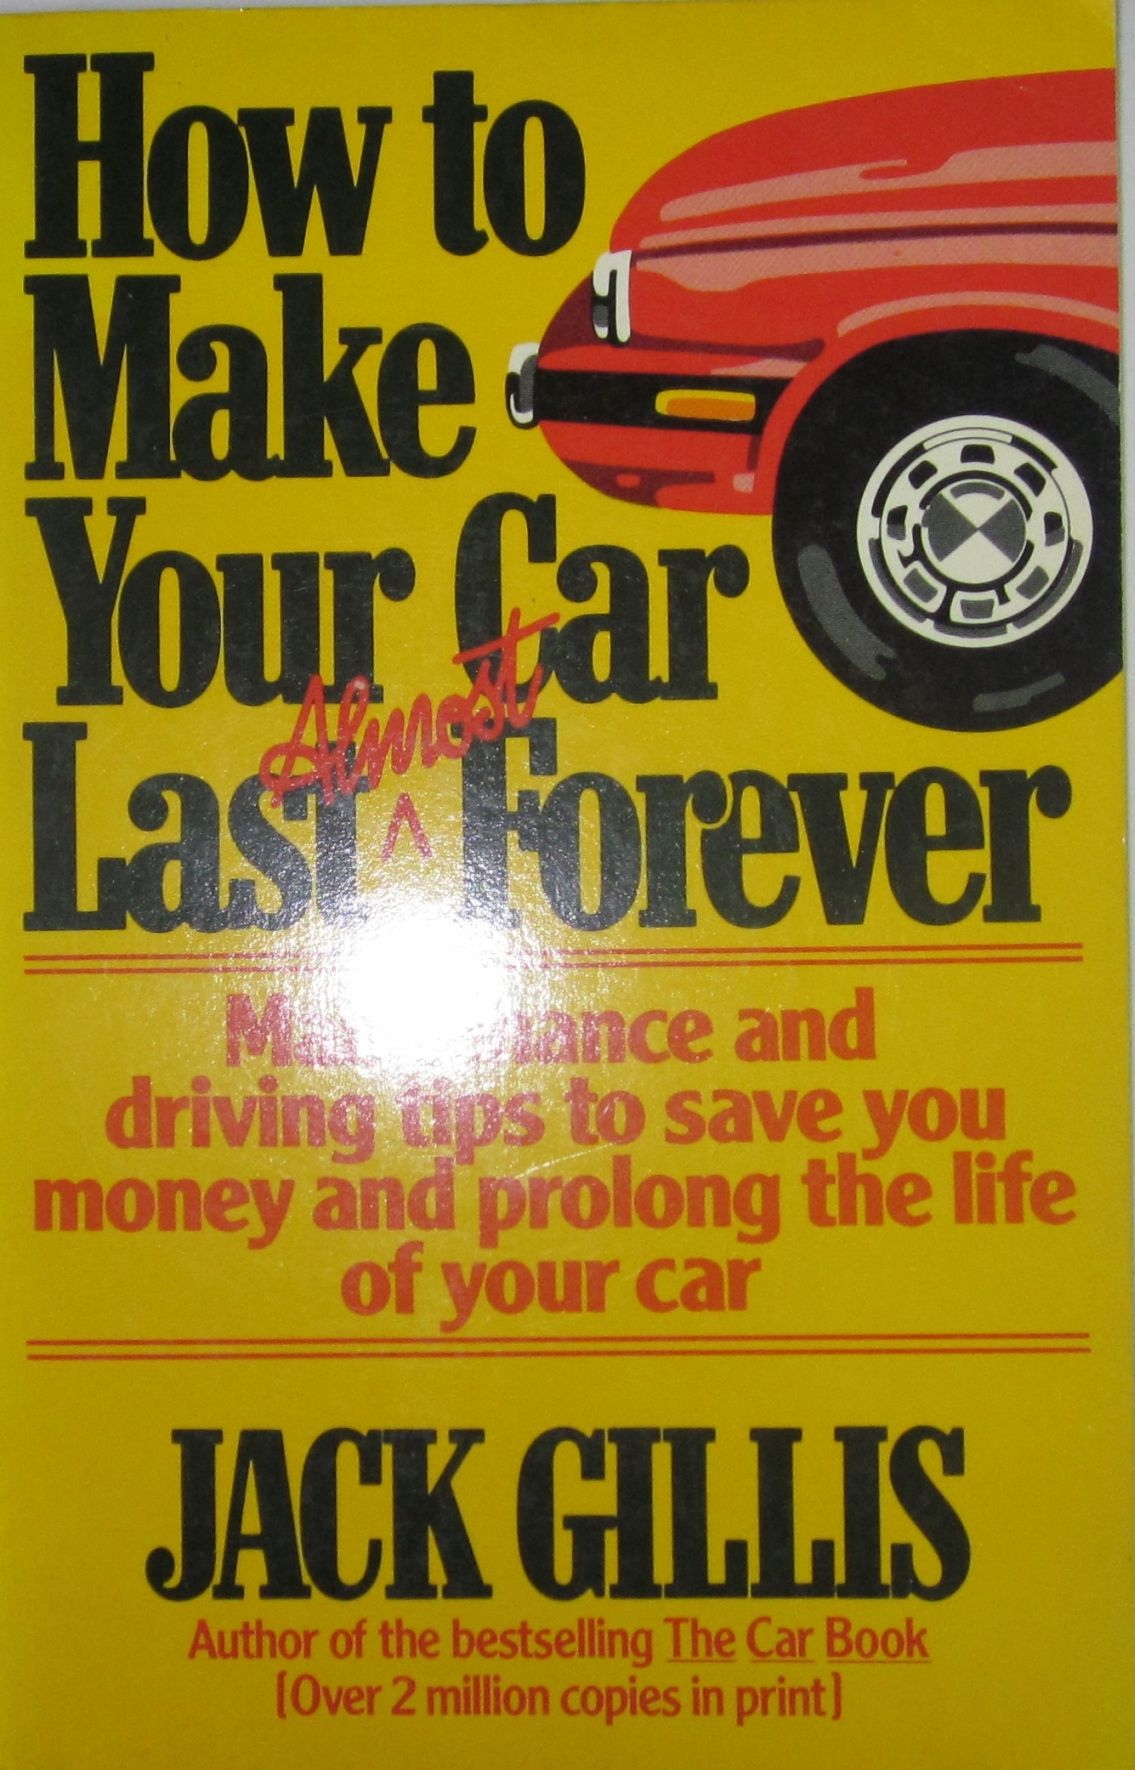 GILLIS, JACK - How to Make Your Car Last Almost Forever